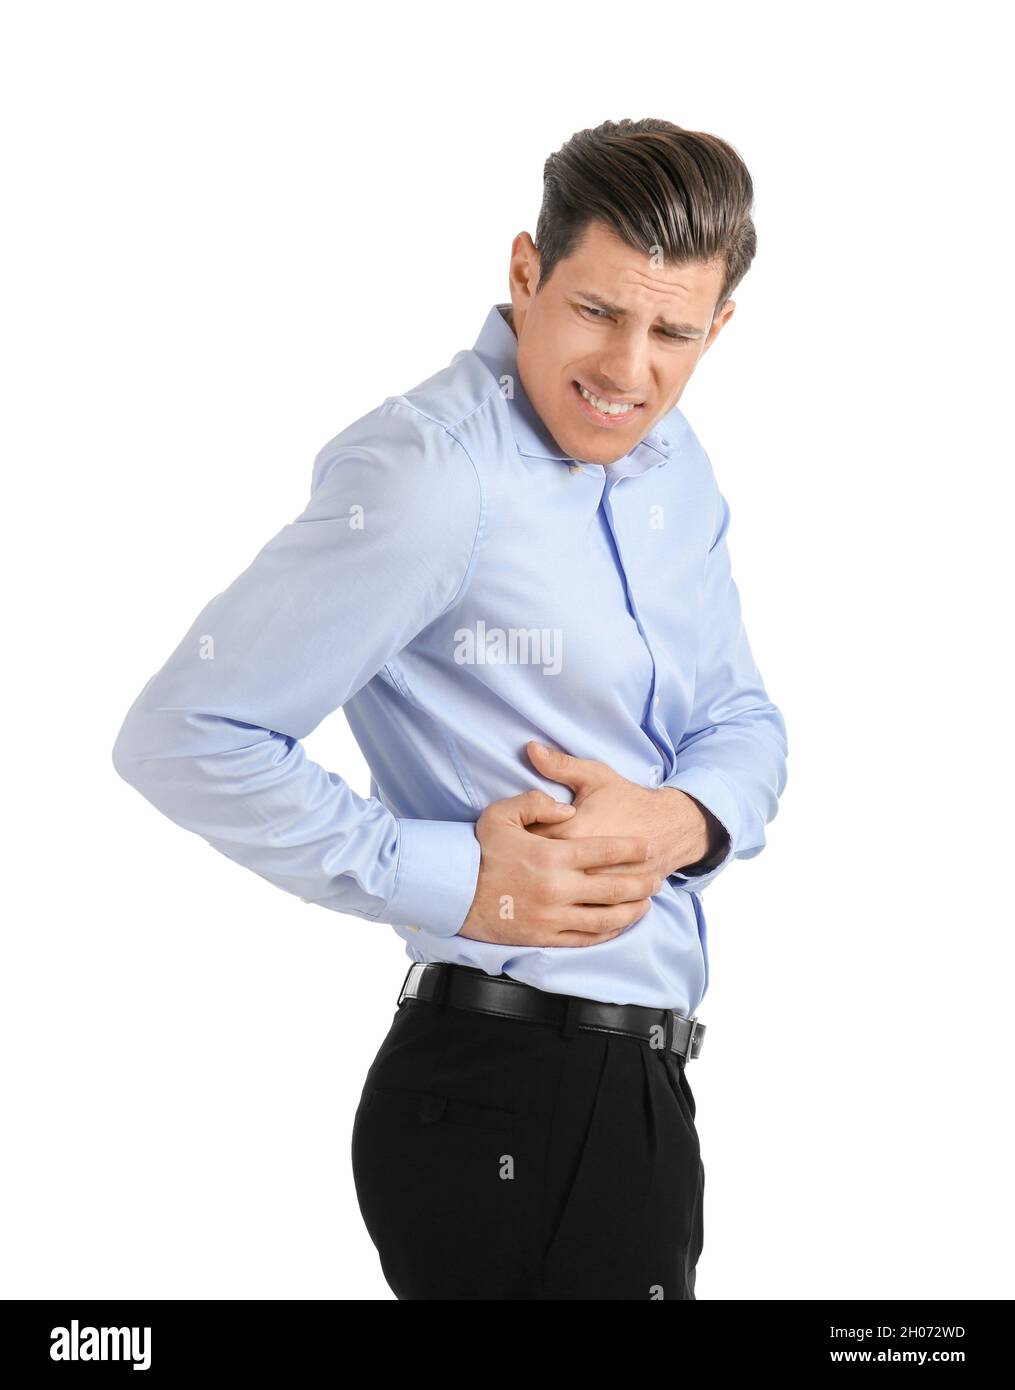 Man suffering from flank pain on white background Stock Photo - Alamy